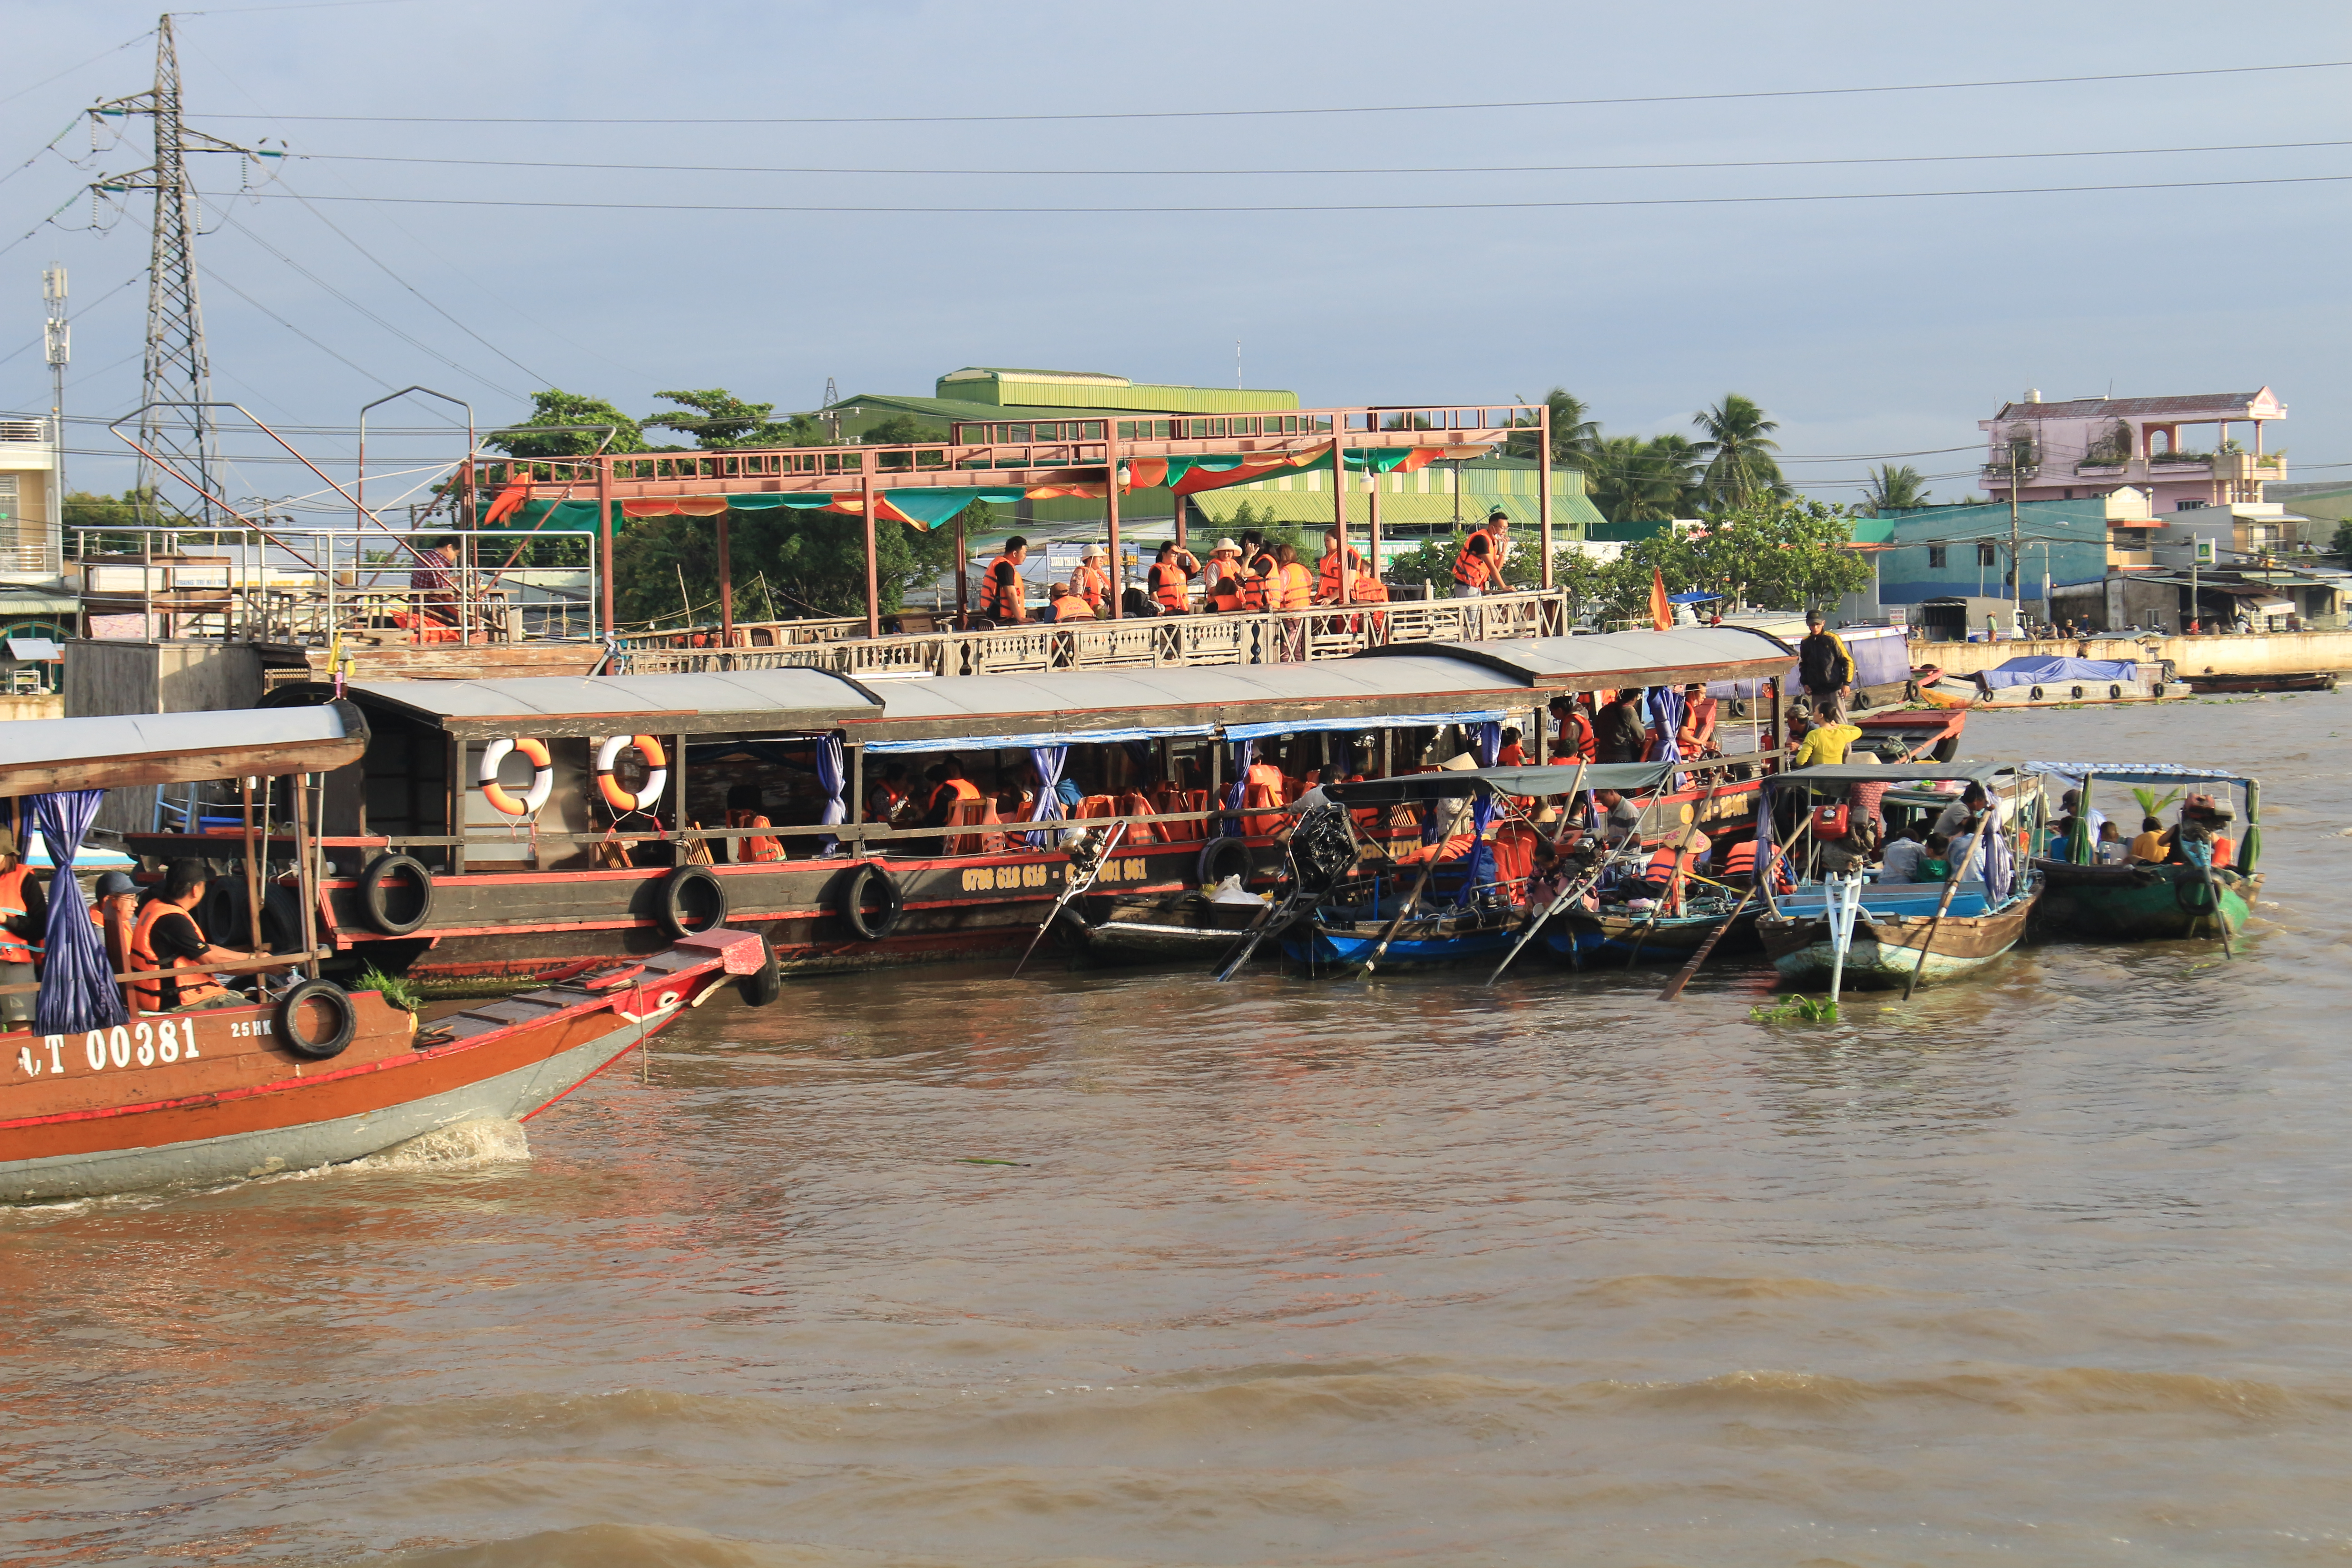 Floating market in Vietnam's Can Tho isn't dying, it's changing